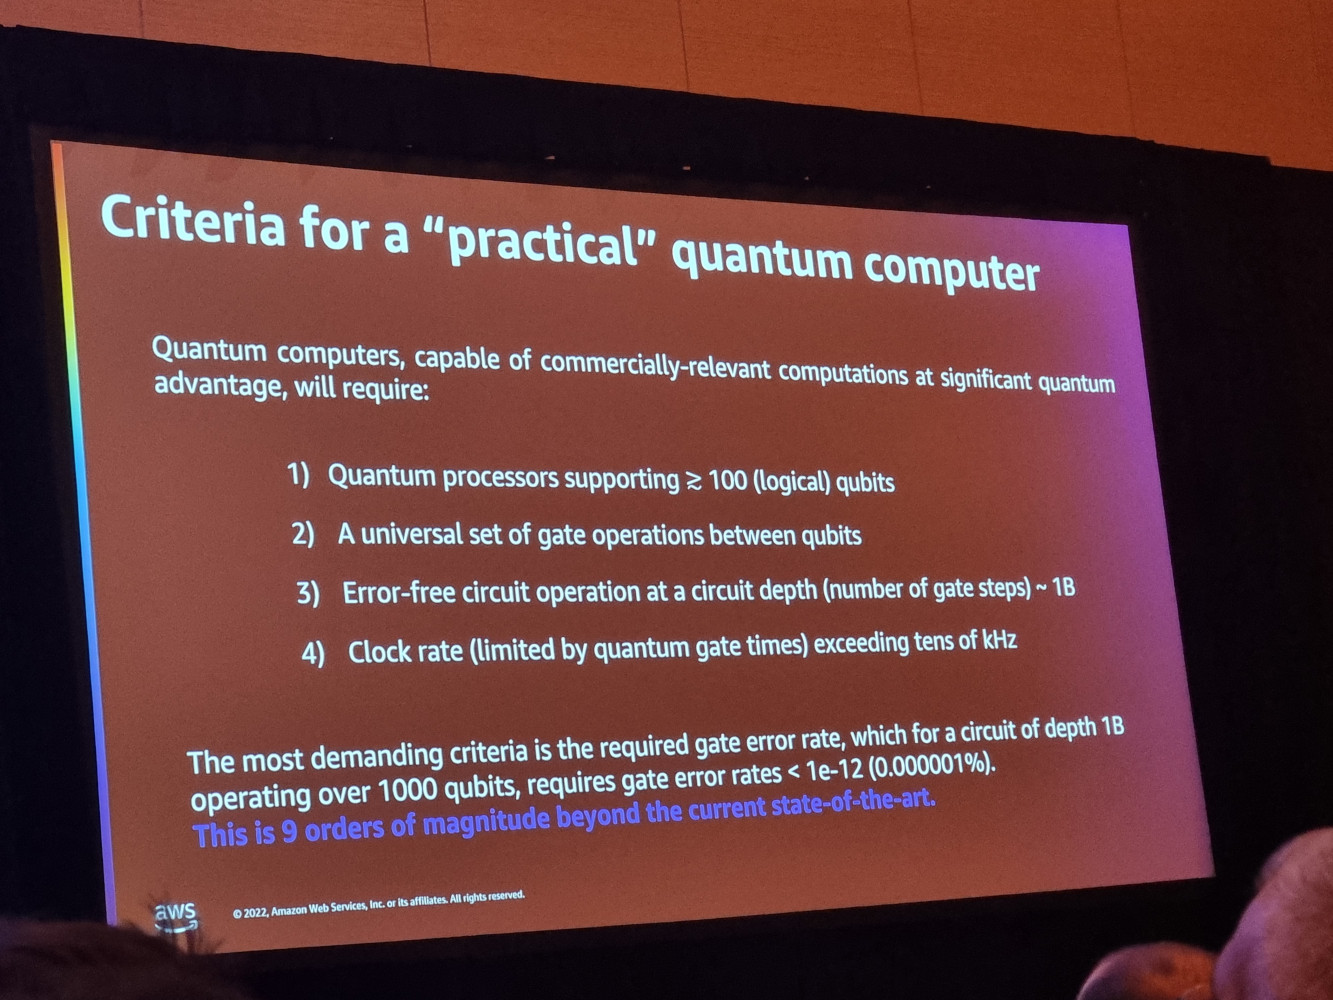 Getting more technical with quantum computing